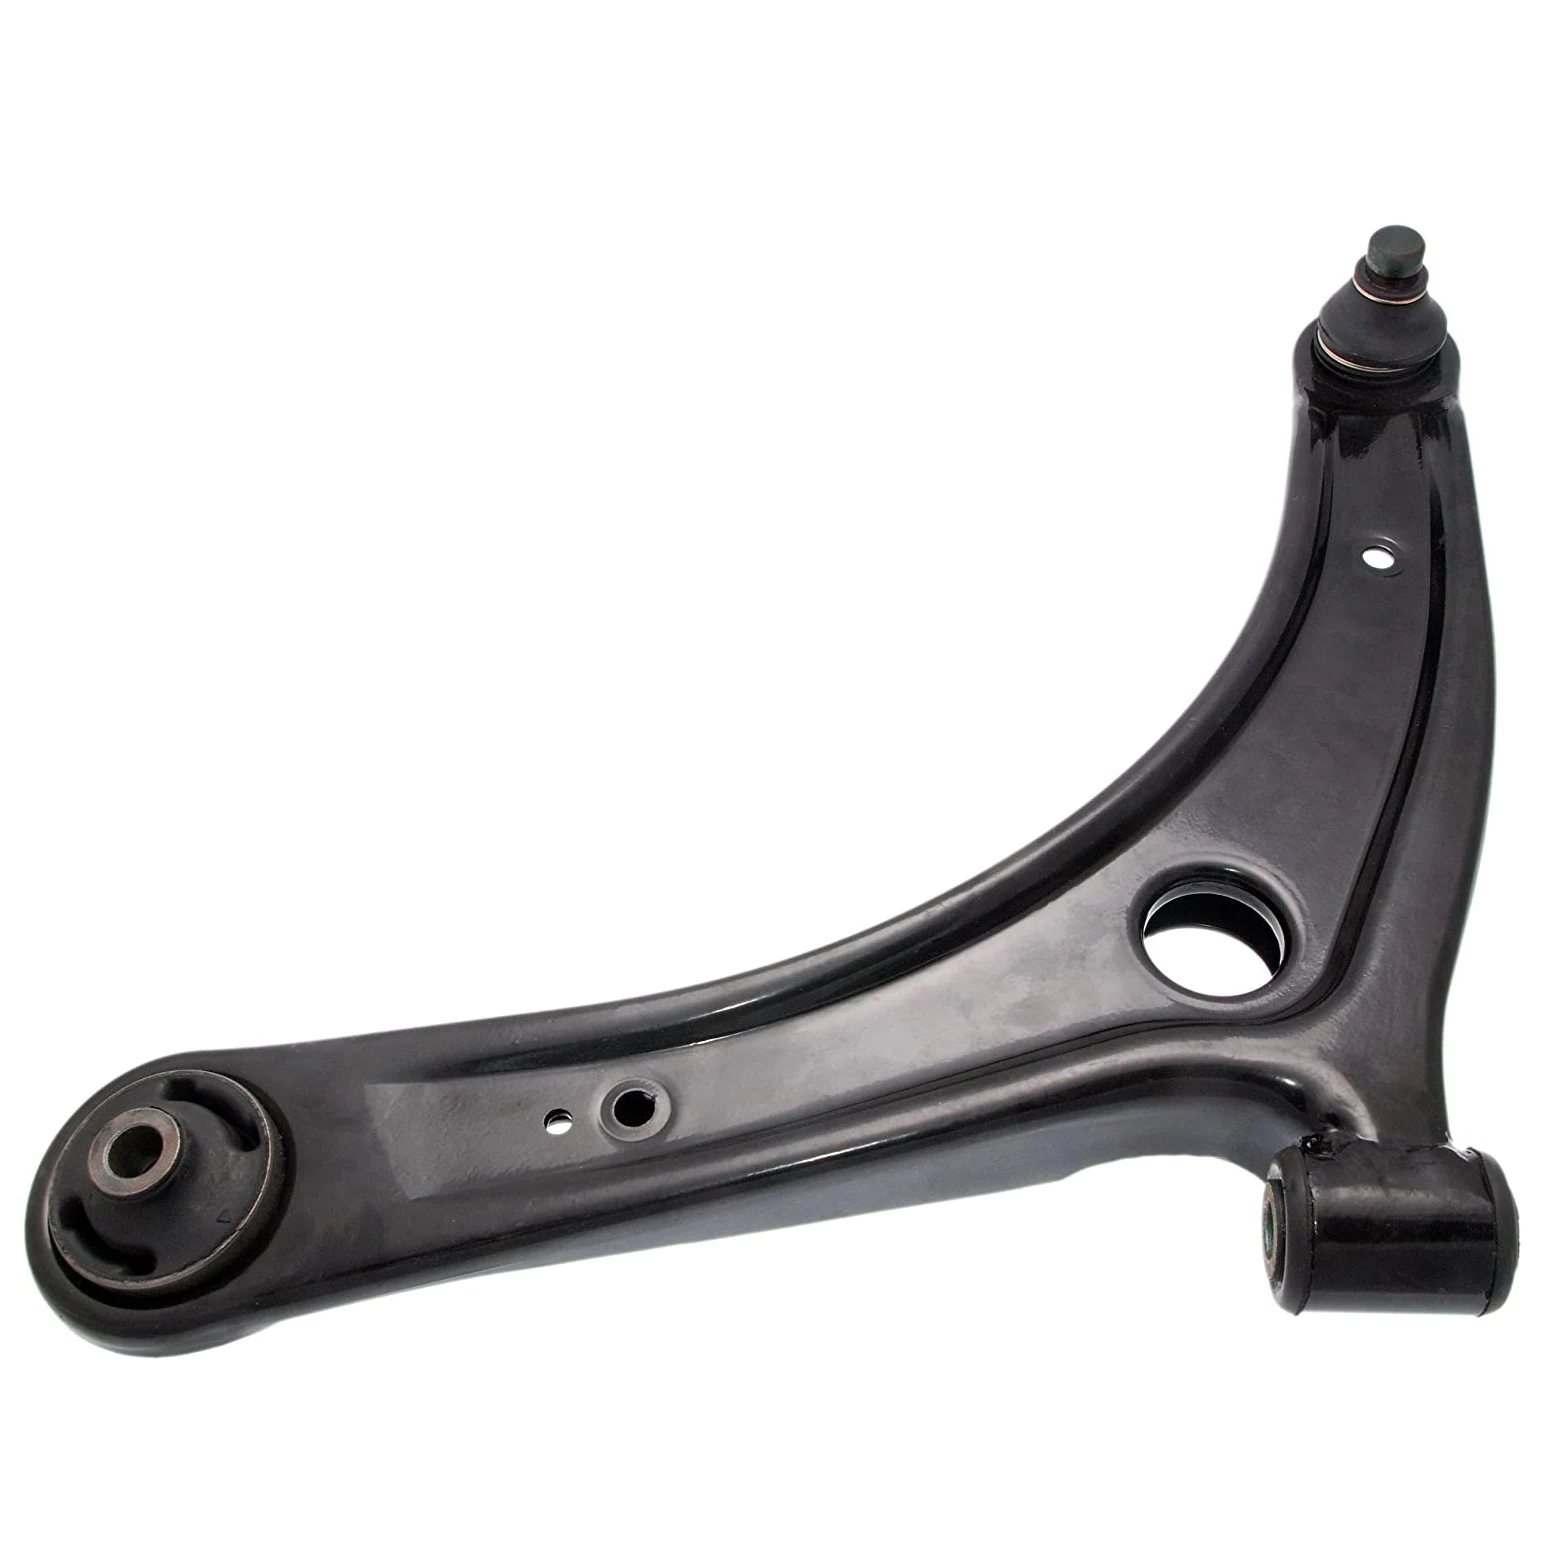 Lower front Control arm for Mitsubishi 2006-2012 Outlander 4013A009 4013A010 4013A279 4013A280 4013A429